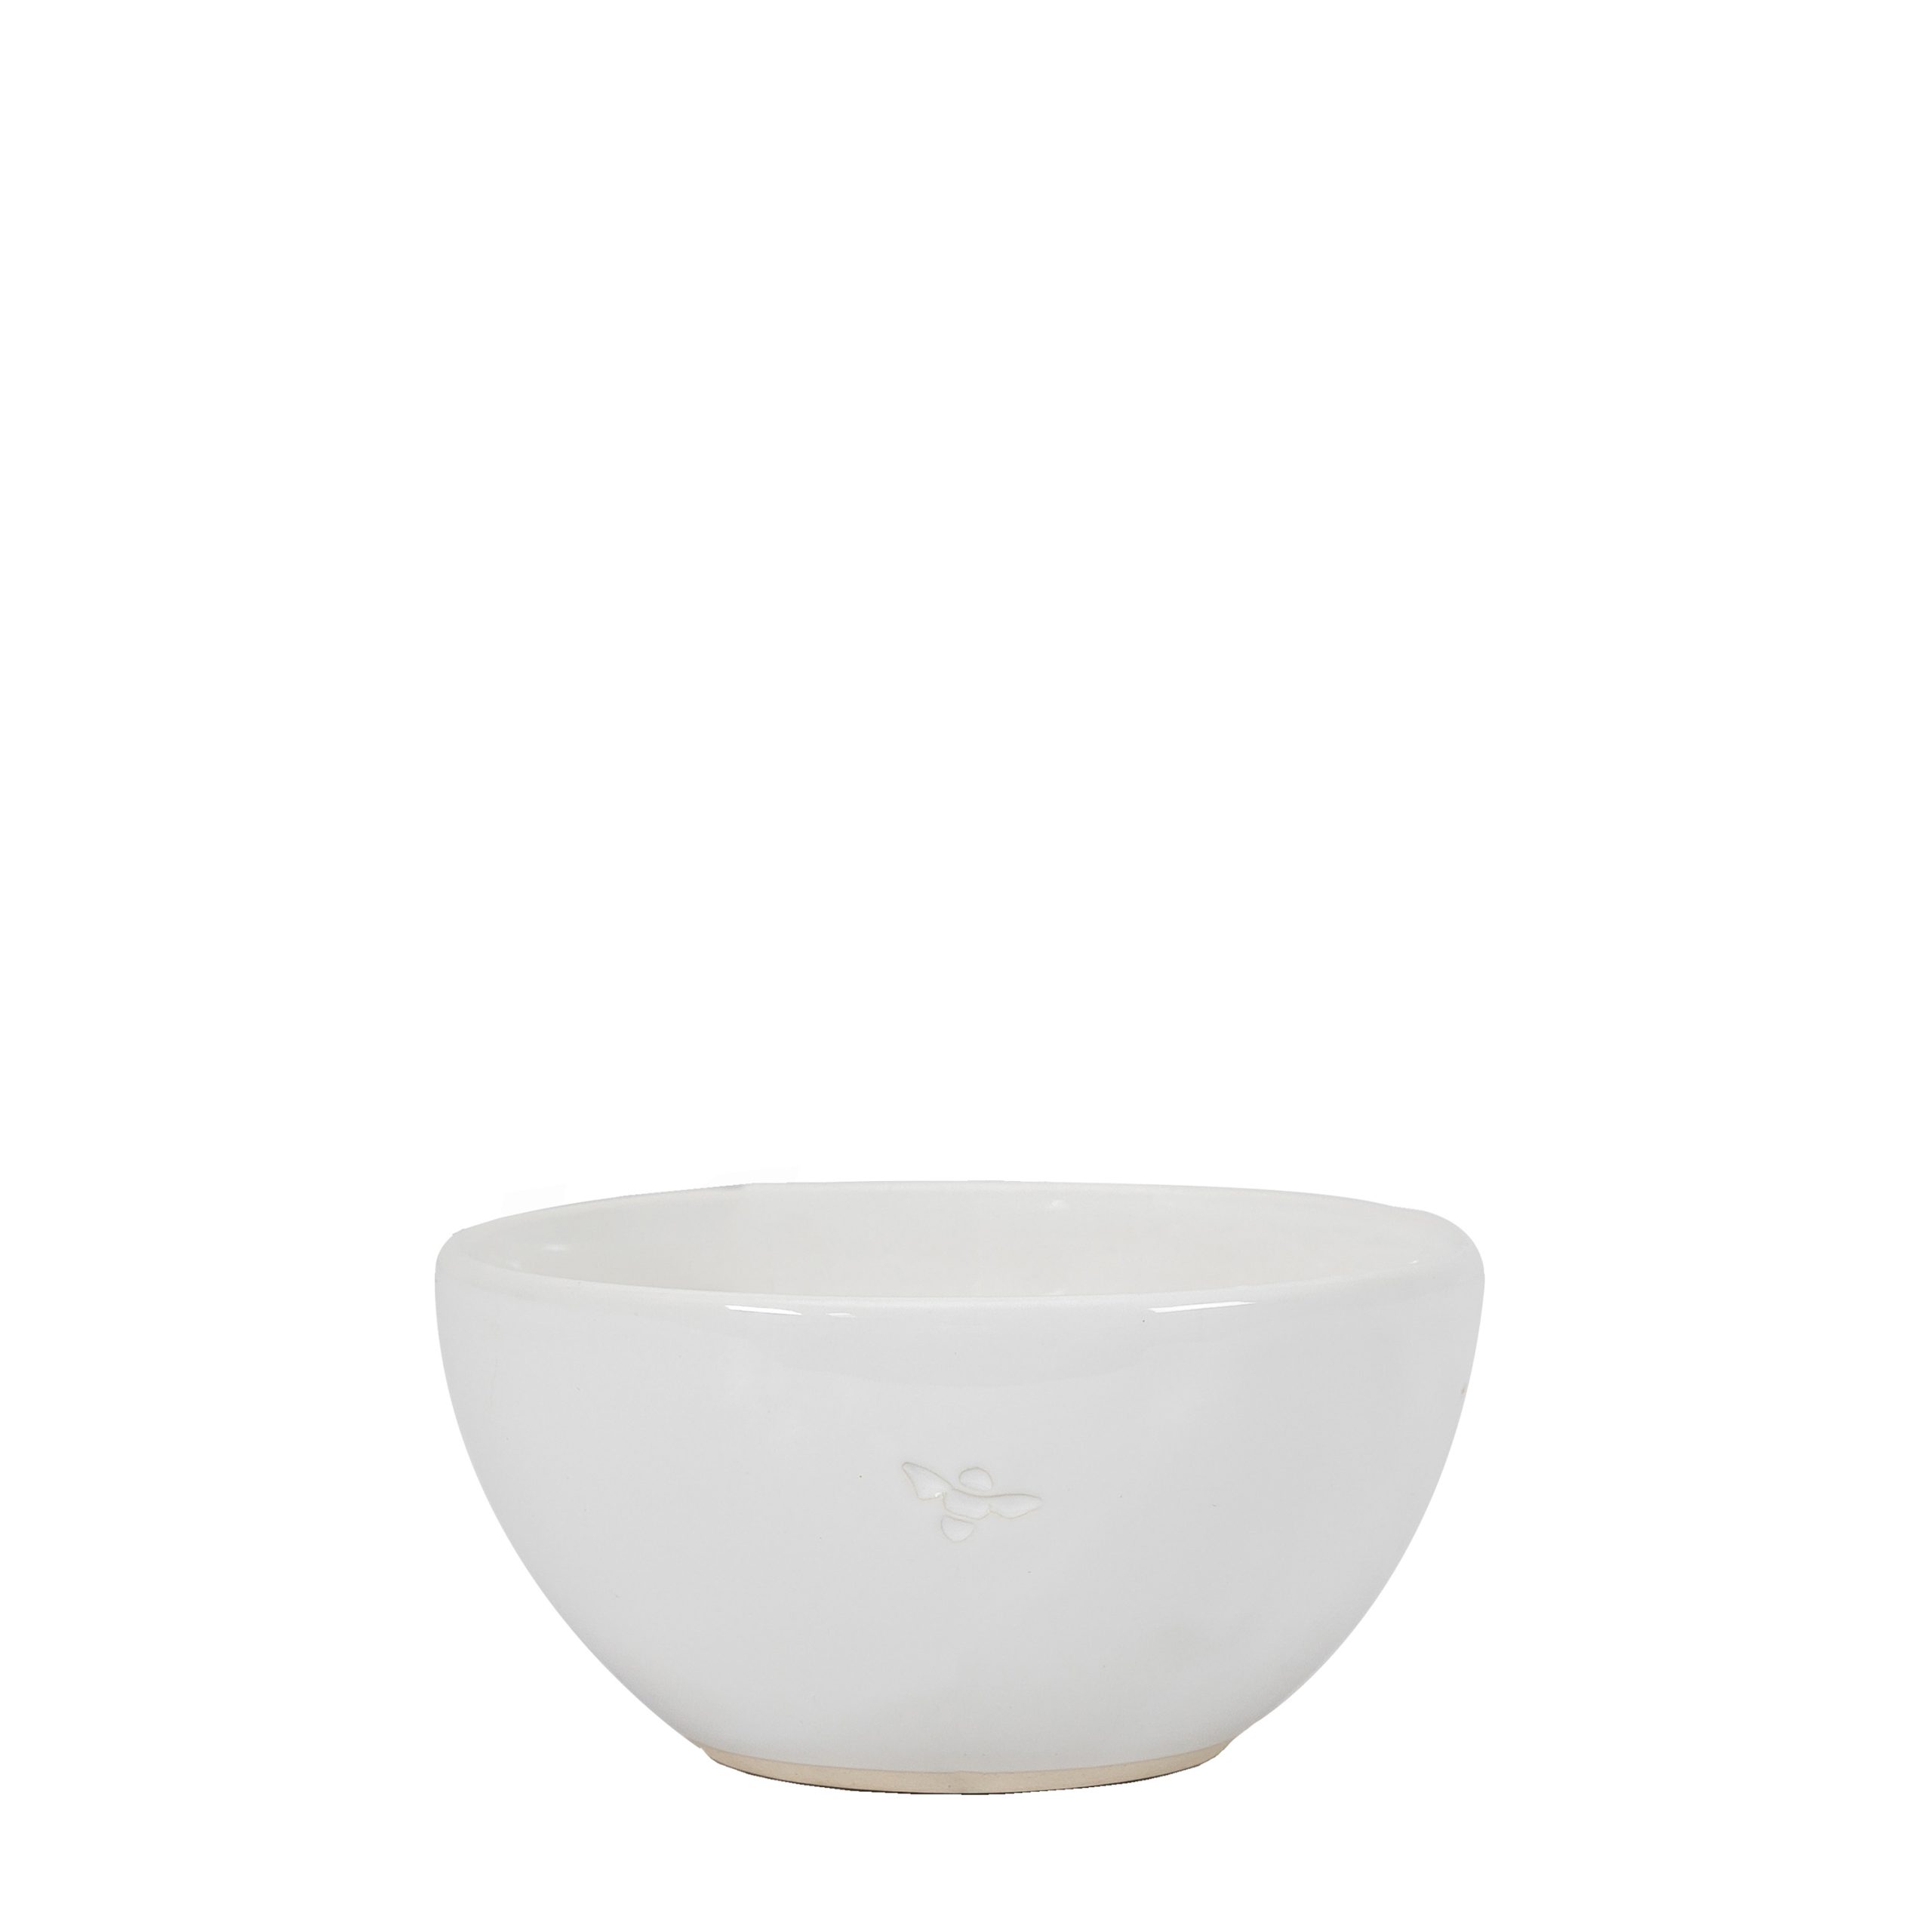 Gallery Direct Bee Cereal Bowl White (Set of 4)